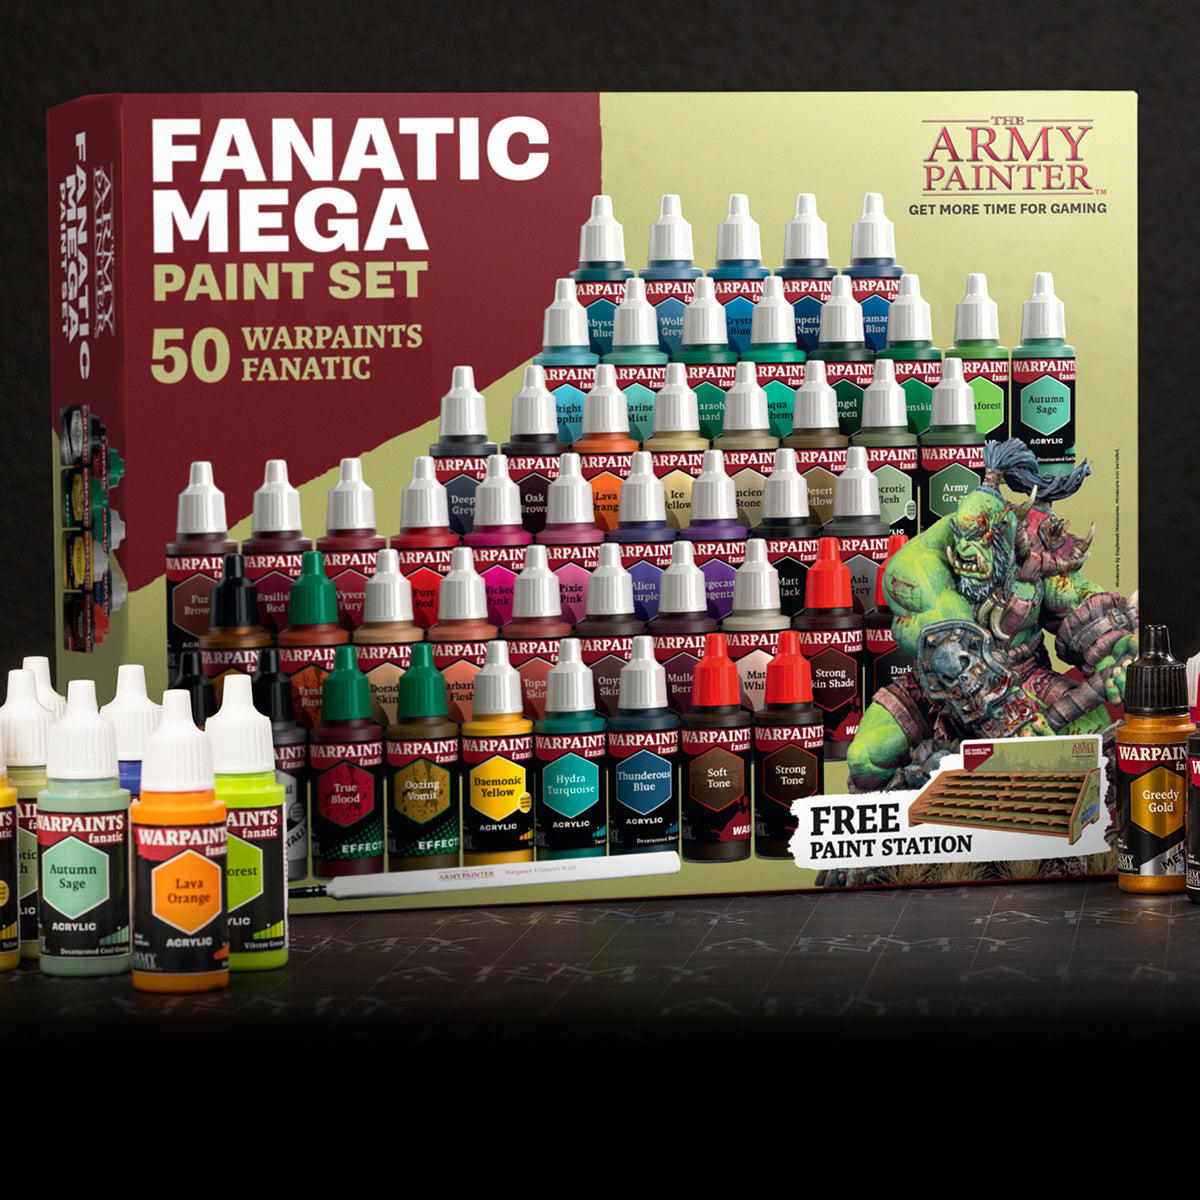 The Army Painter Masterclass: Drybrush Set - Hobby Detail Paint Brush Set -  Acrylic Paint Brushes in 3 Sizes for Advanced & Professional Art for